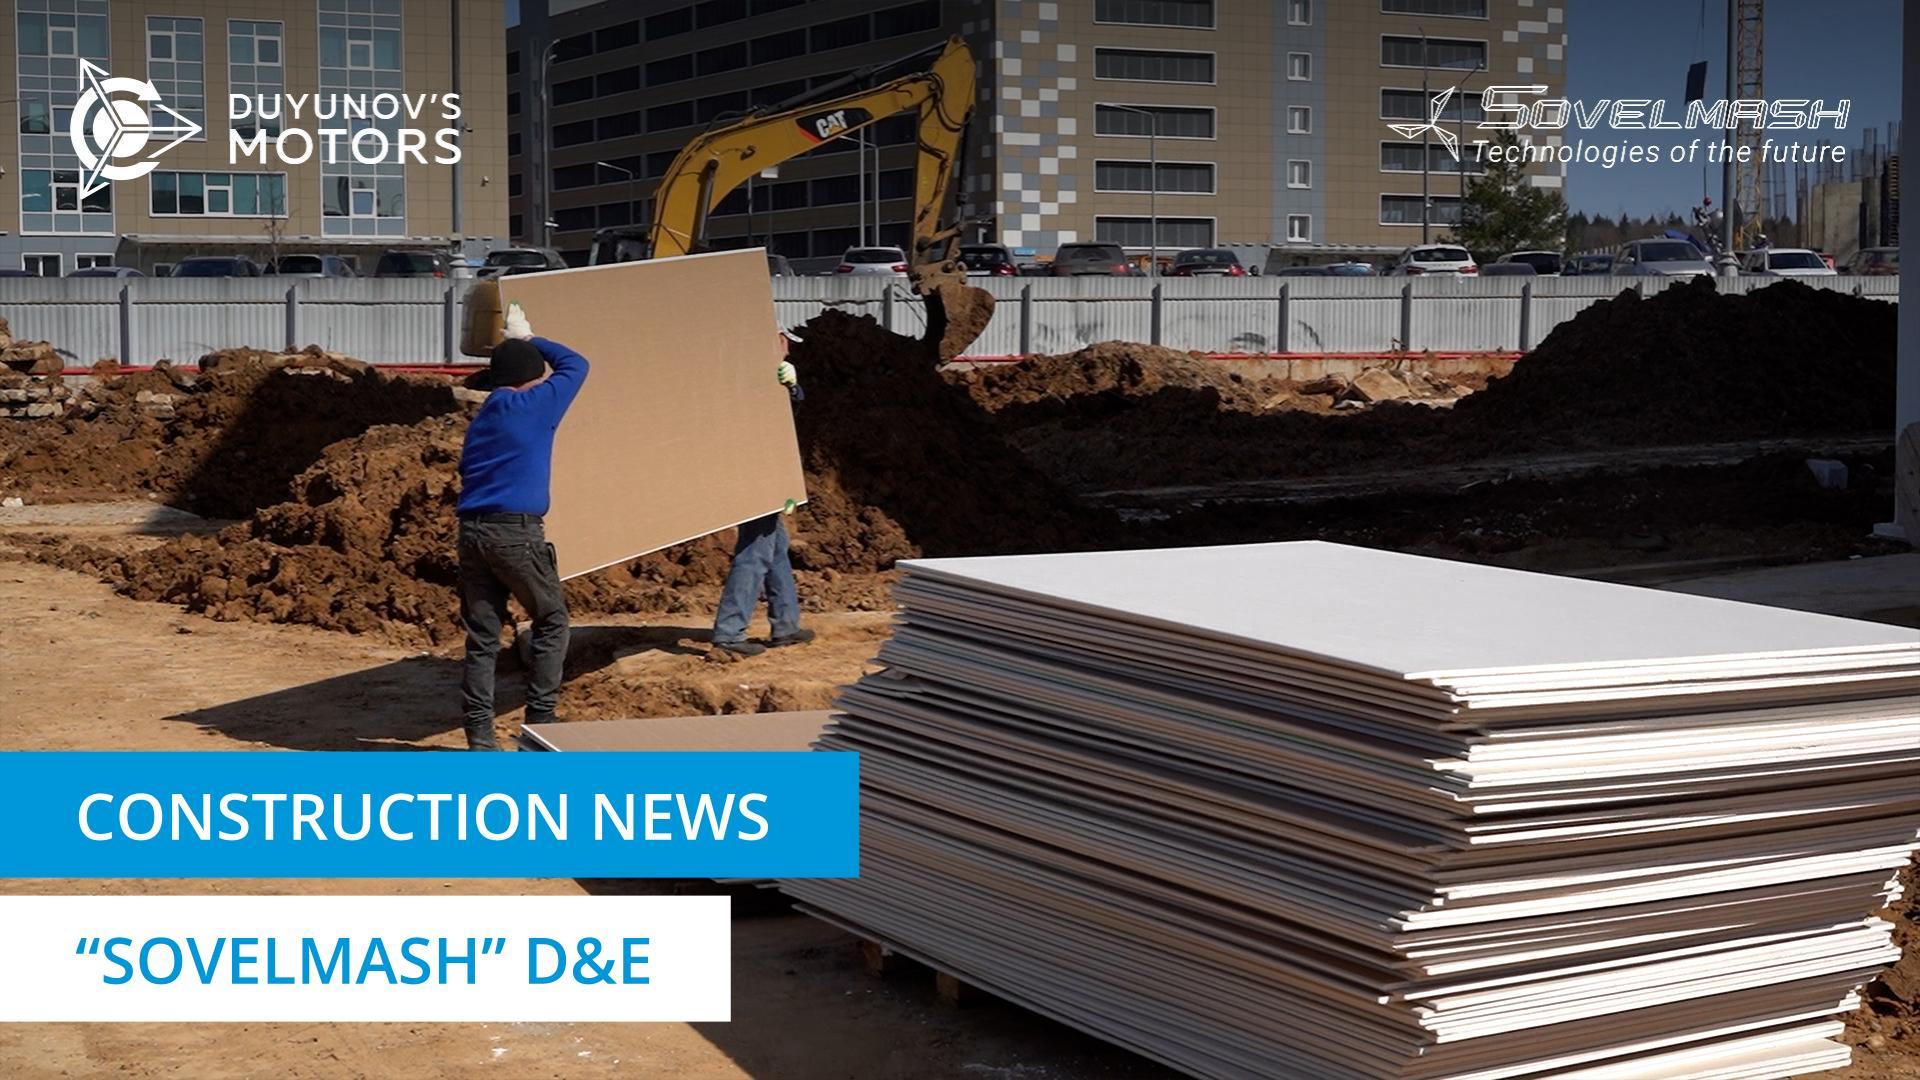 Video report from "Sovelmash" D&E construction site